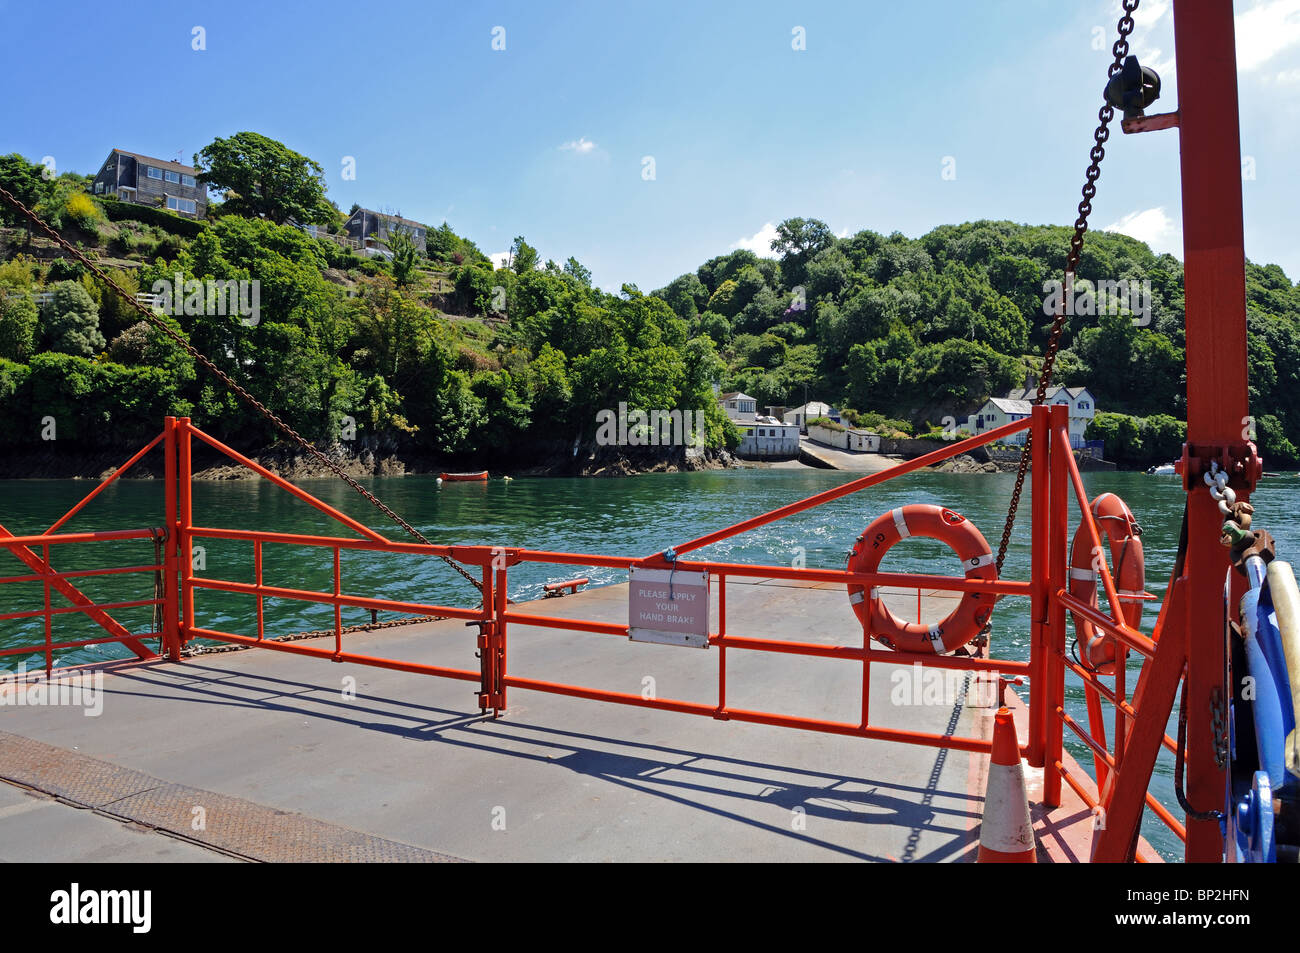 the bodinnick ferry crossing the river near fowey in cornwall, uk Stock Photo